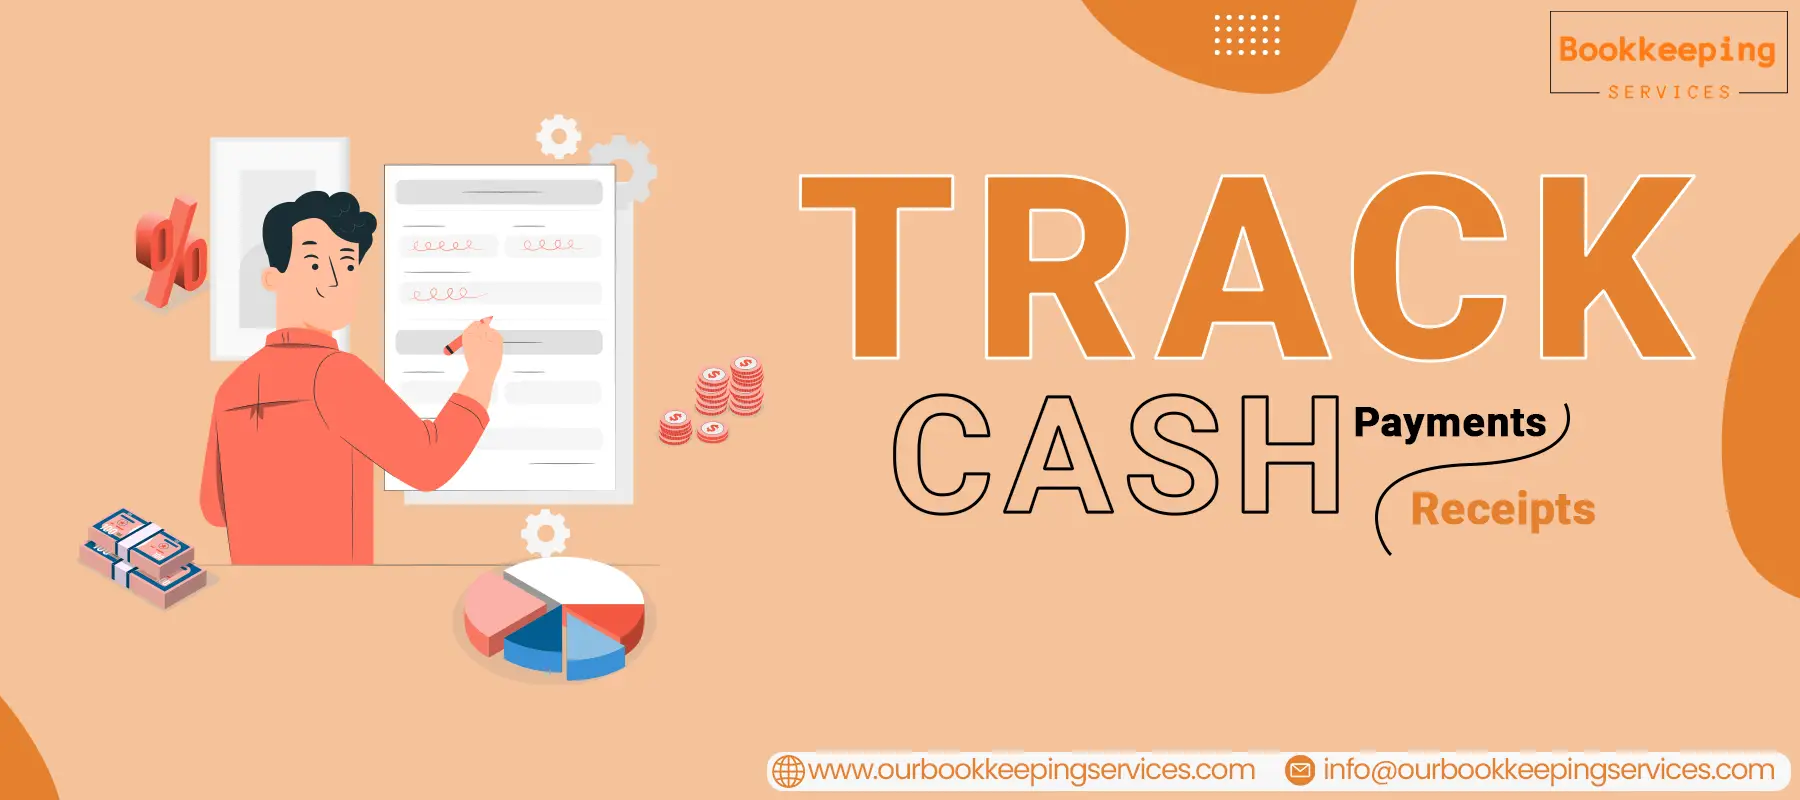 Keep track of cash payments and receipts